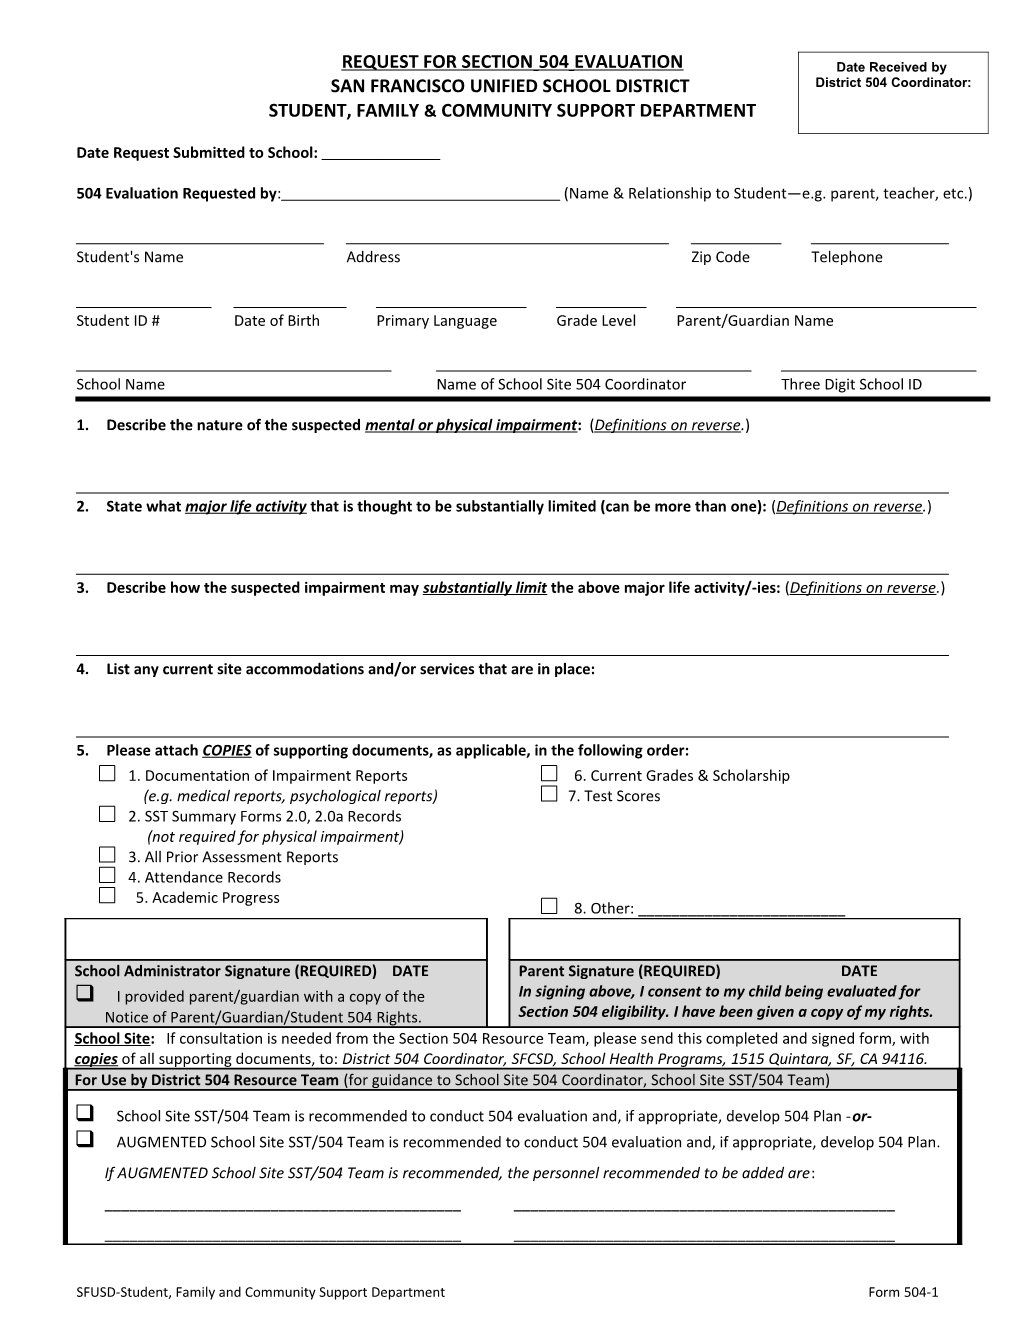 Request for Section 504 Evaluation